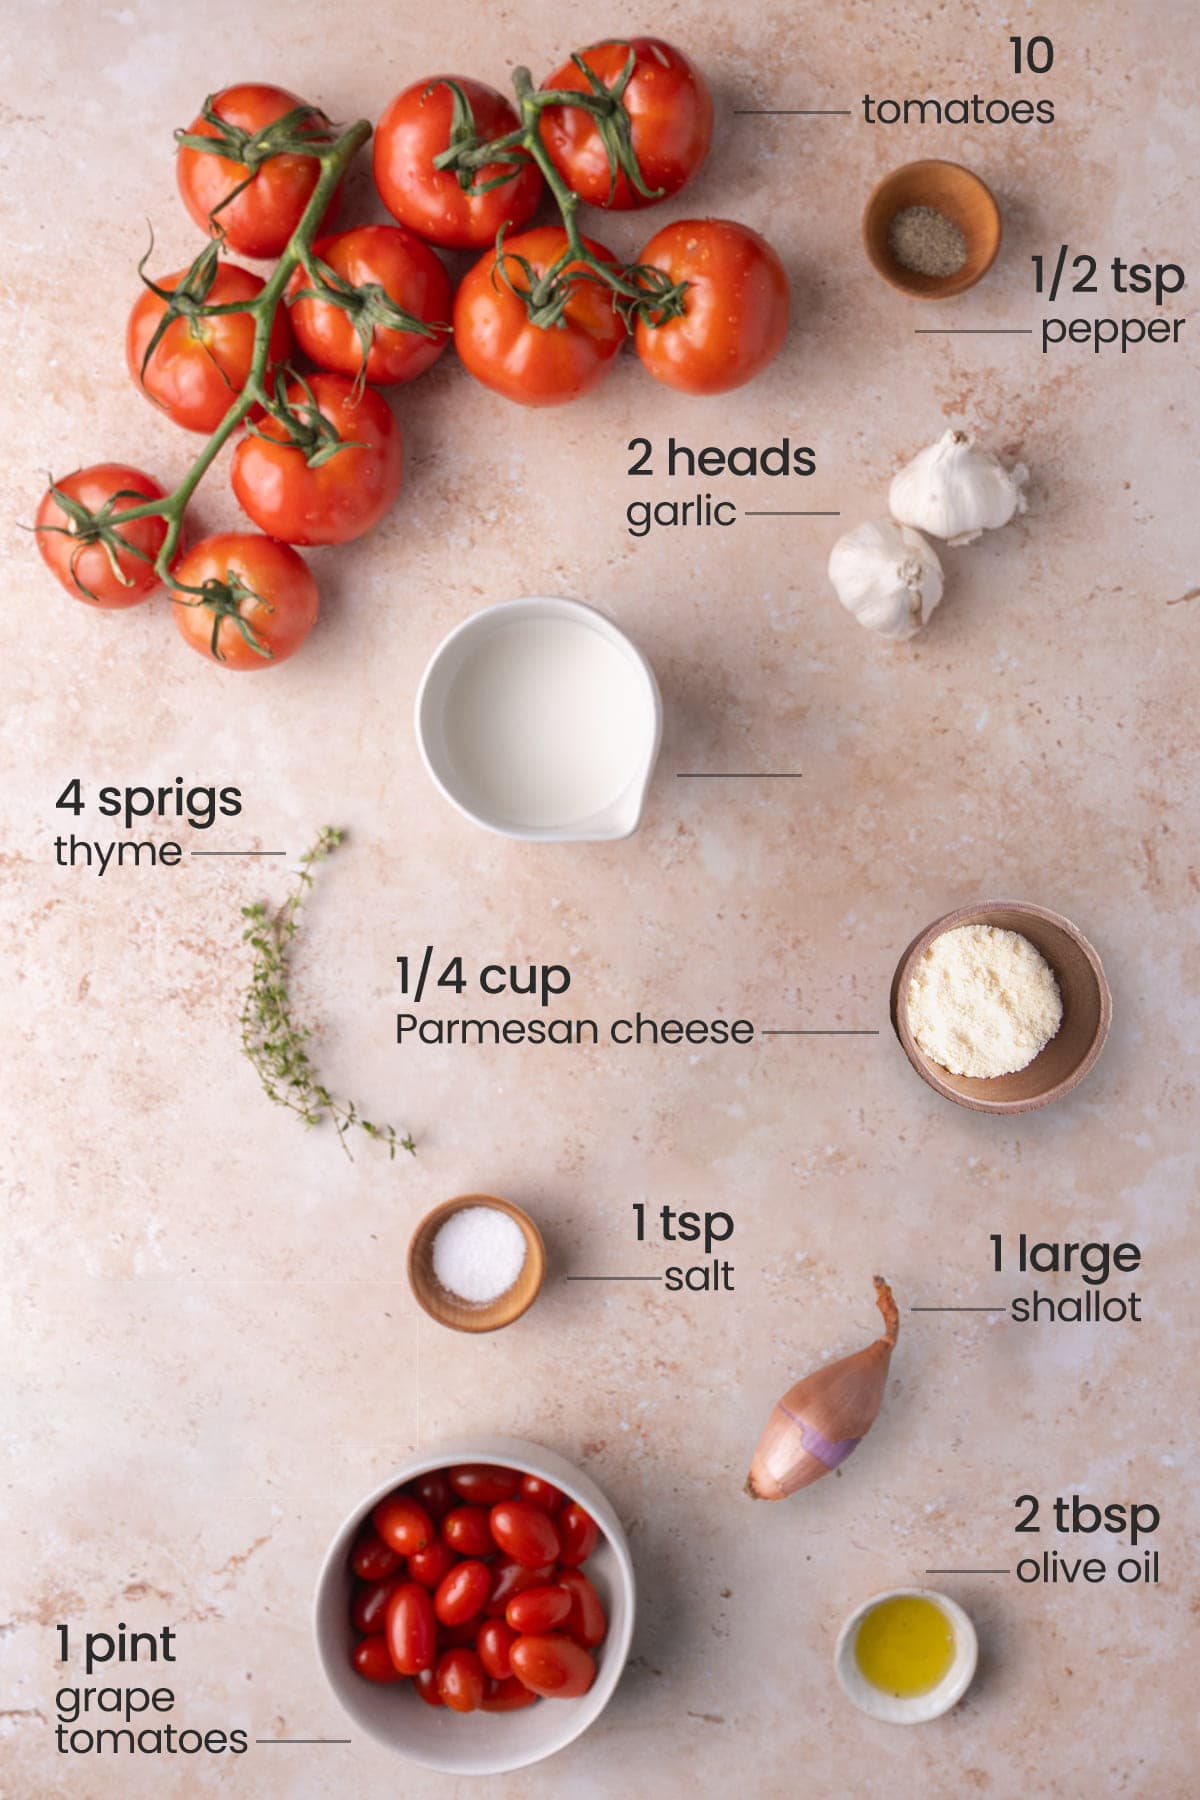 All ingredients for Roasted Garlic Tomato Soup - tomatoes, pepper, garlic, thyme, Parmesan cheese, salt, shallot, olive oil, grape tomatoes